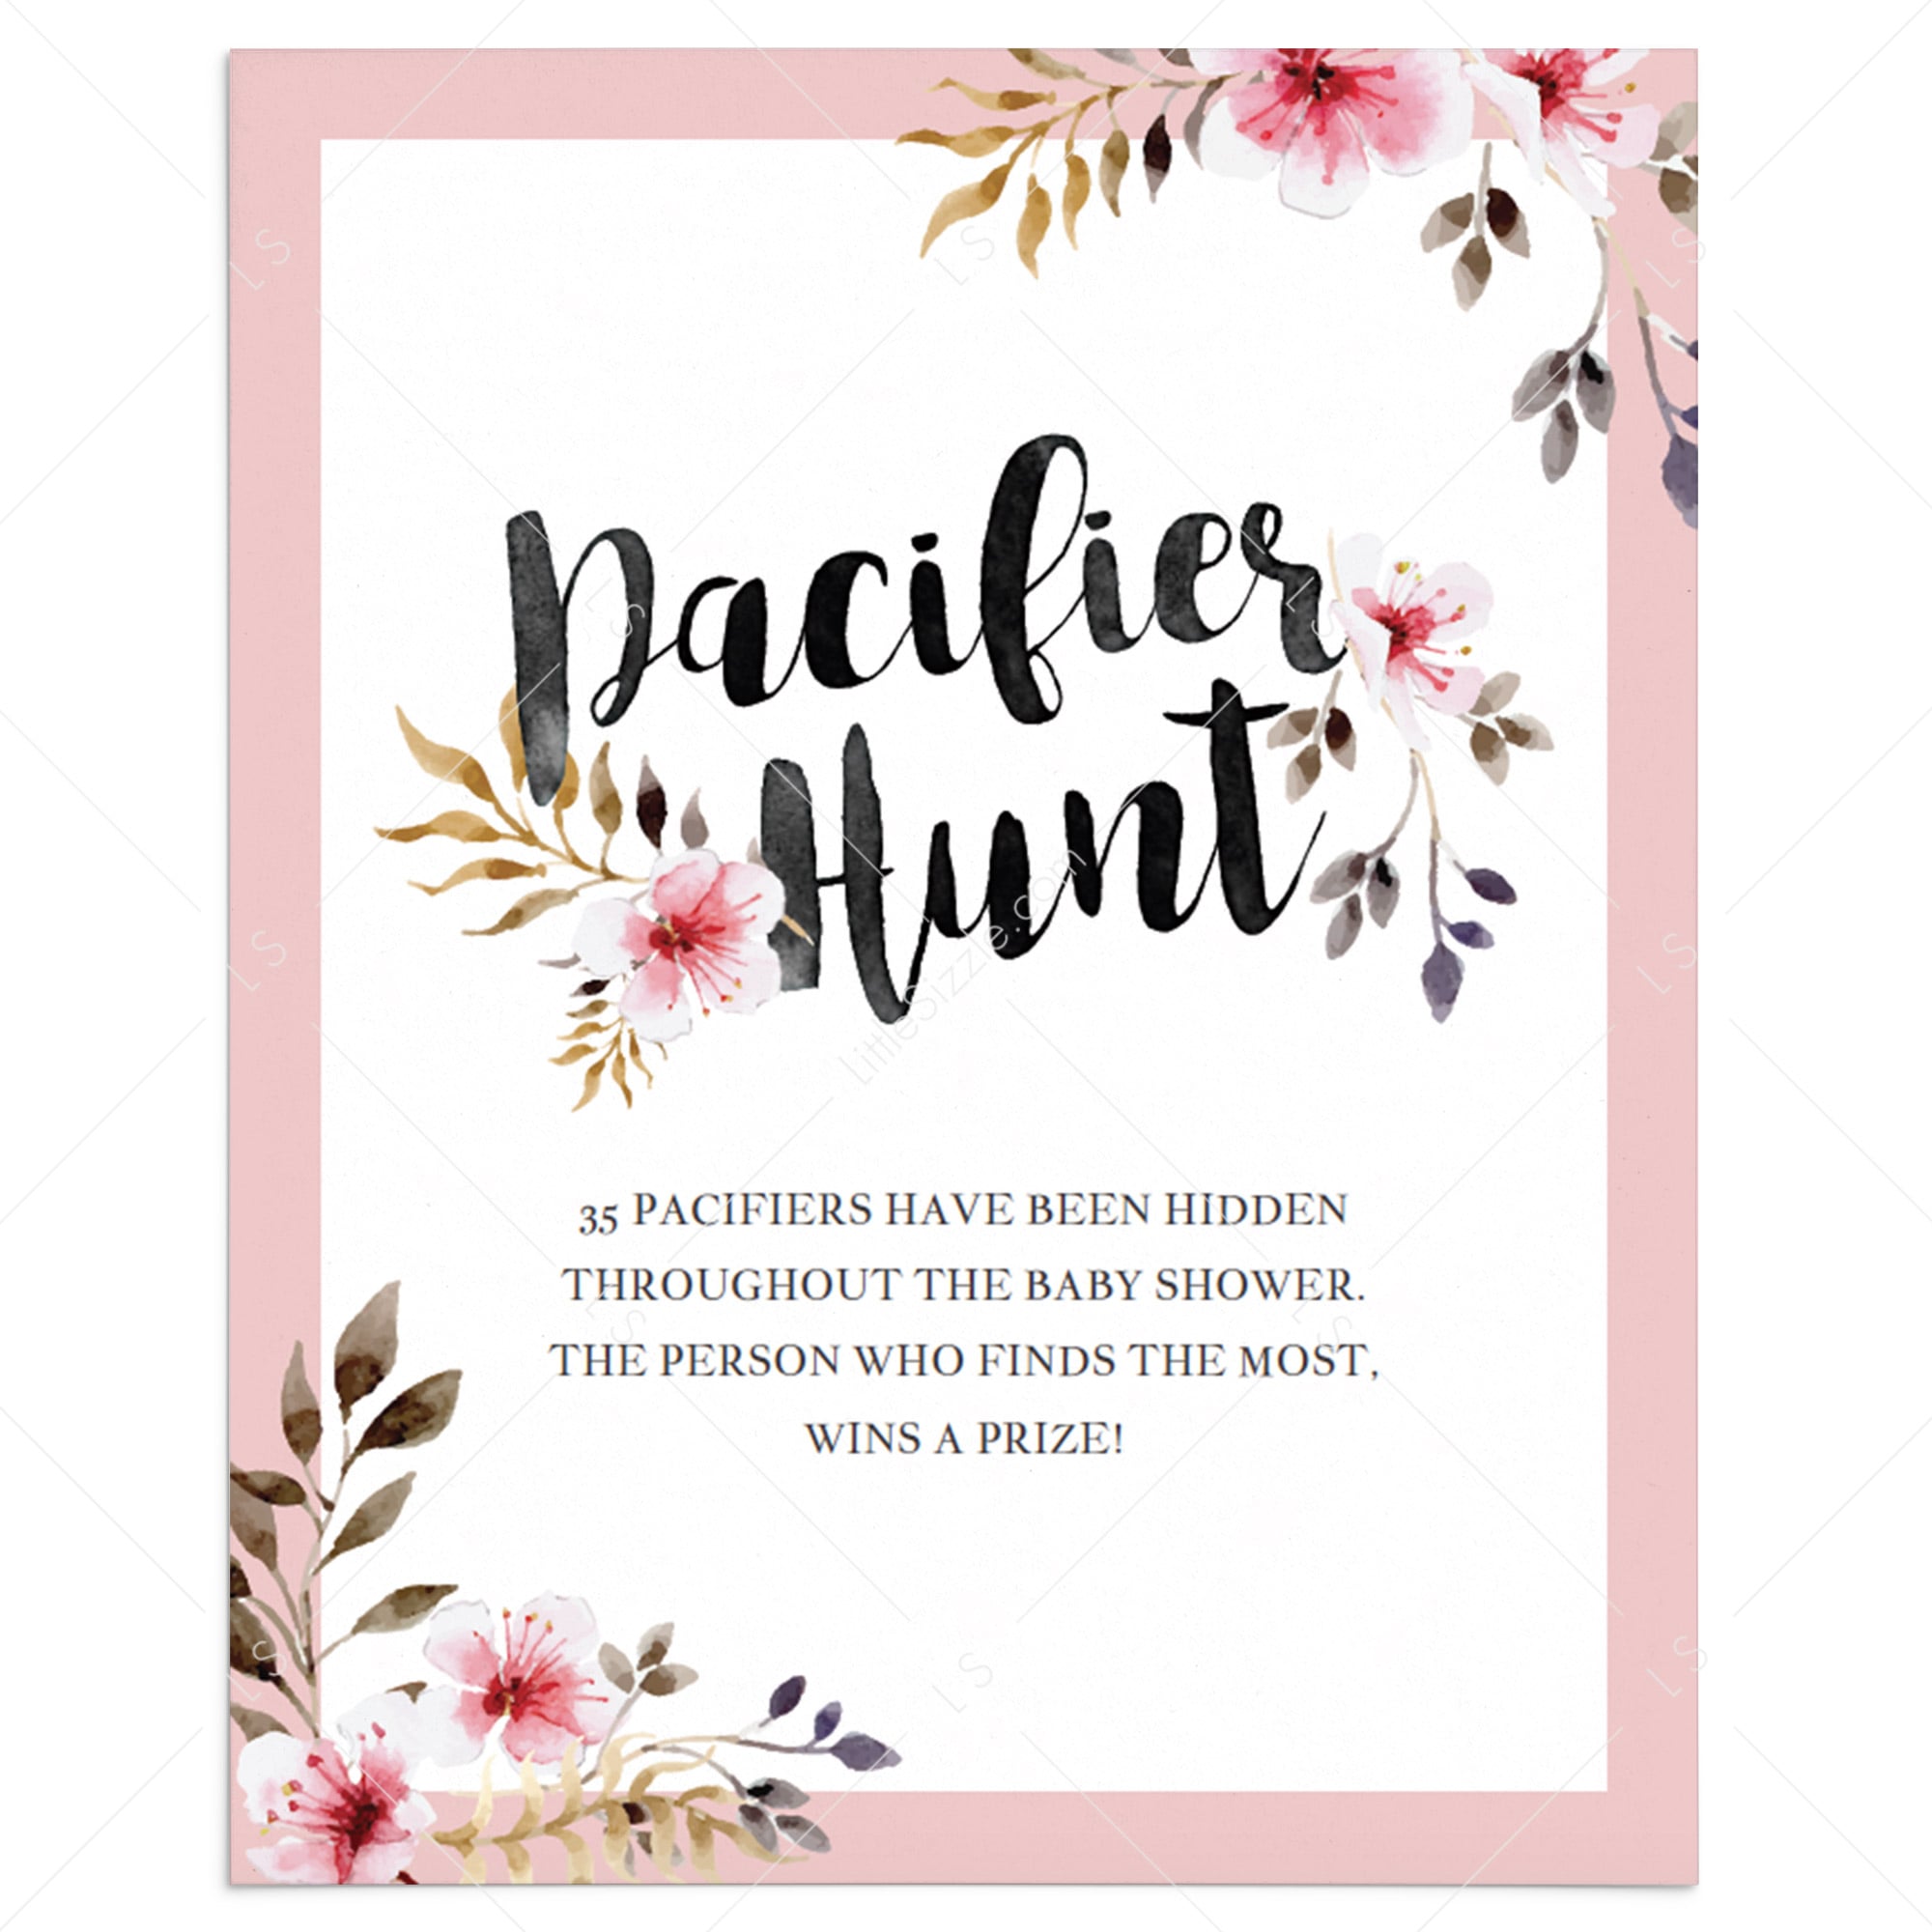 Pacifier hunt sign blush flowers baby shower by LittleSizzle